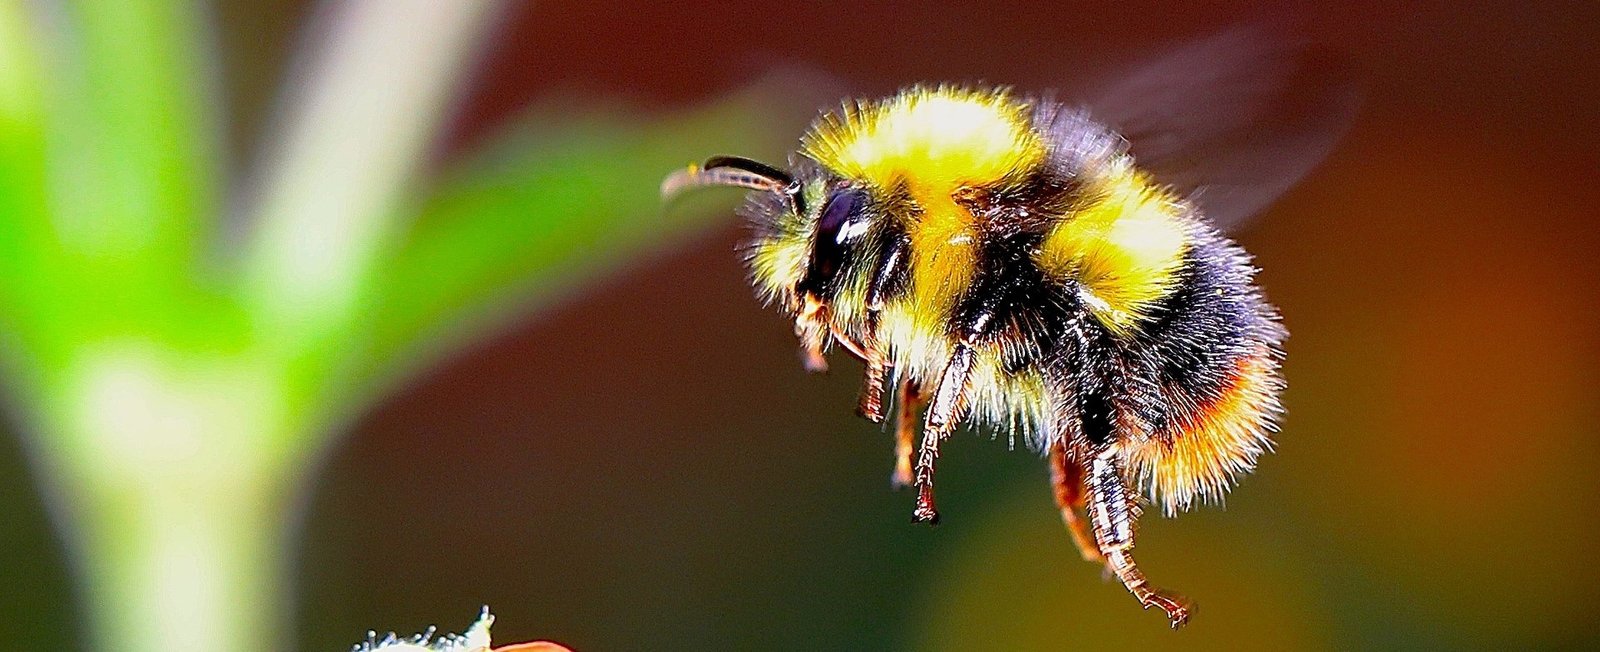 Image of flying bumble bee searching for pollen